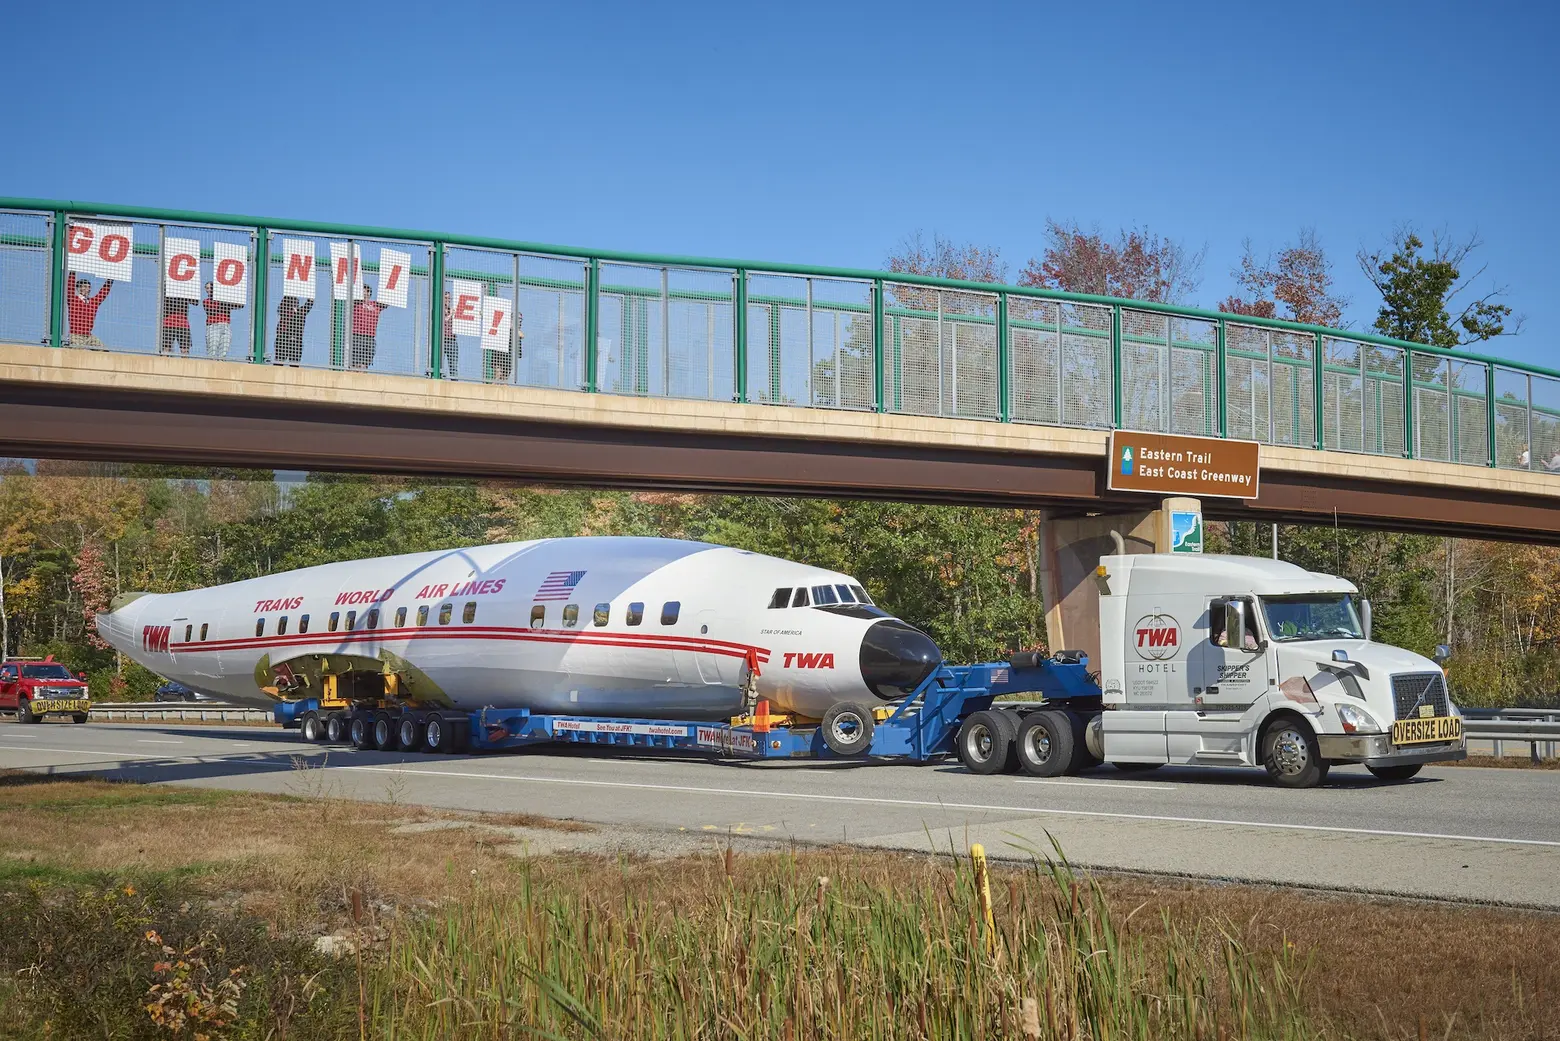 See the TWA Hotel’s airplane-turned-cocktail lounge make the 300-mile journey to JFK via tow truck